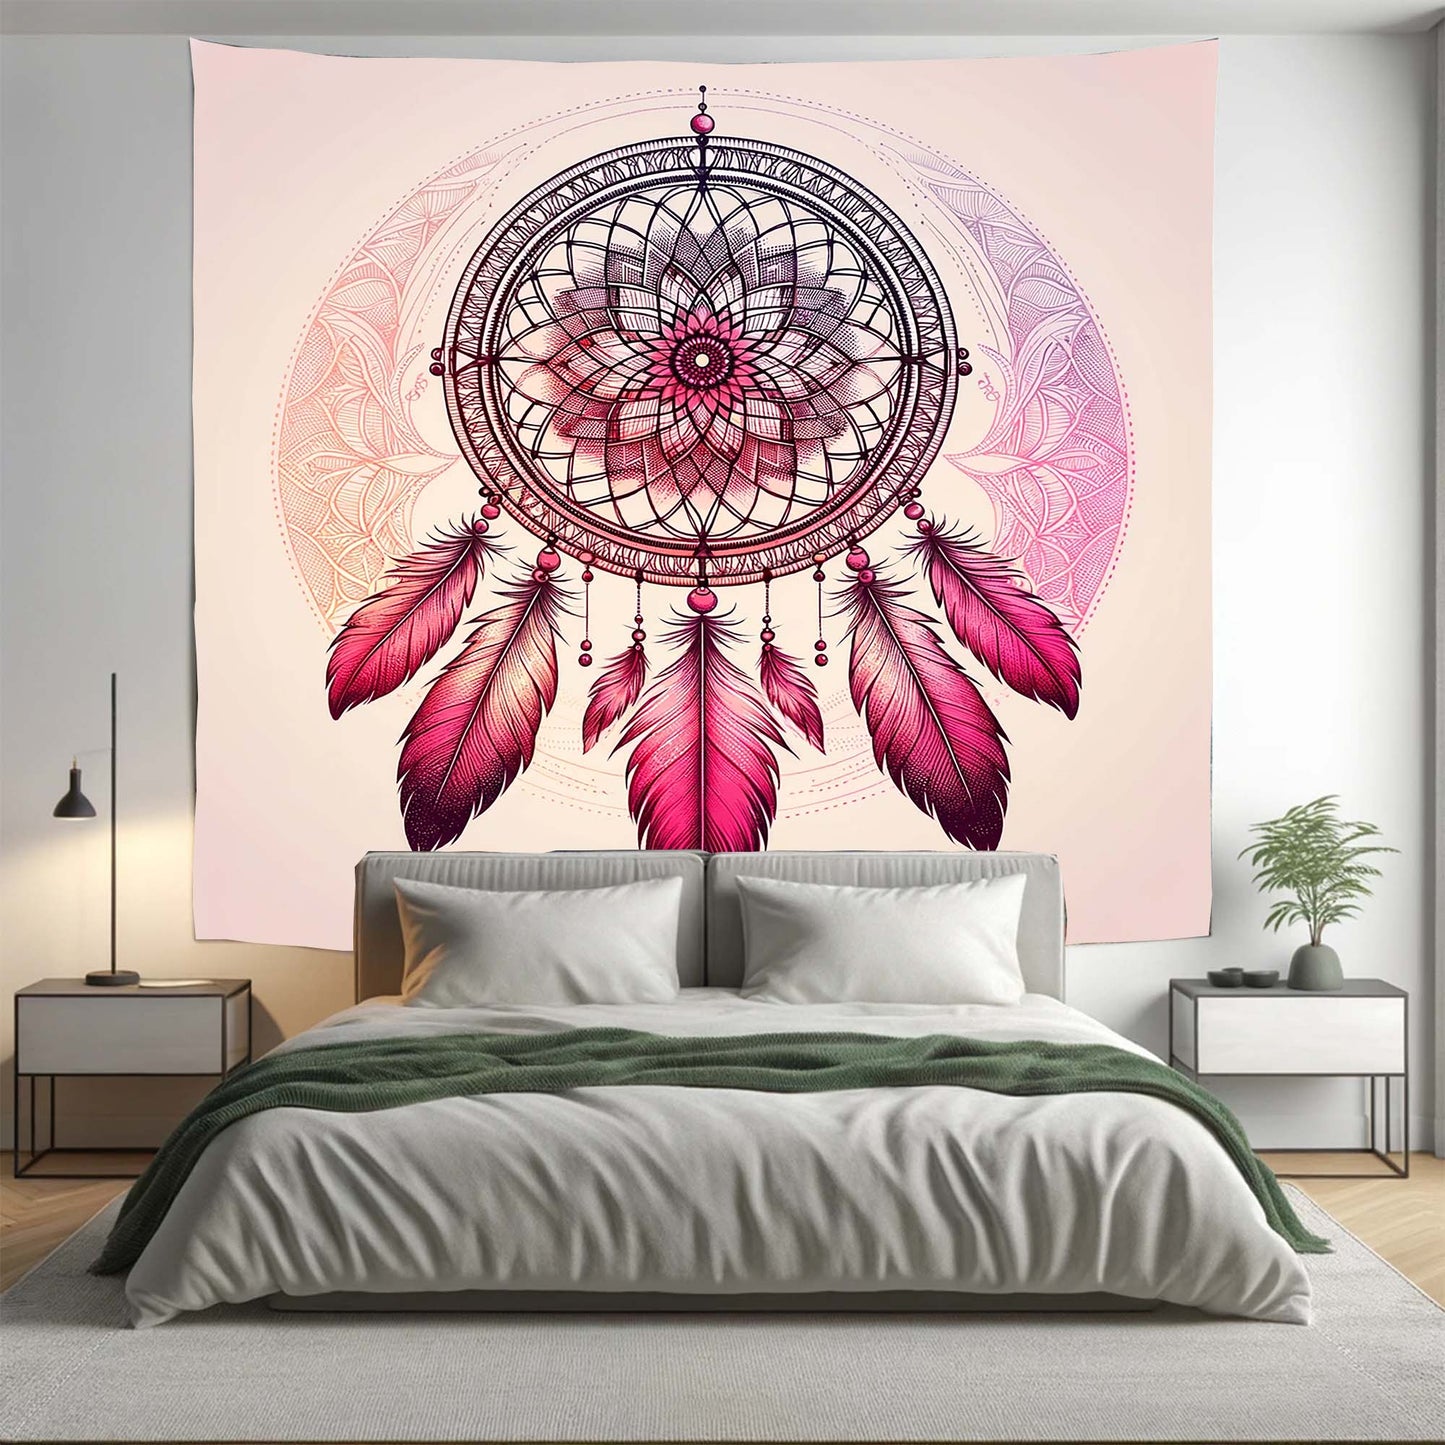 Bohemian Pink Ombre Dreamcatcher Mandala Tapestry Psychedelic Wall Hanging Boho Decor